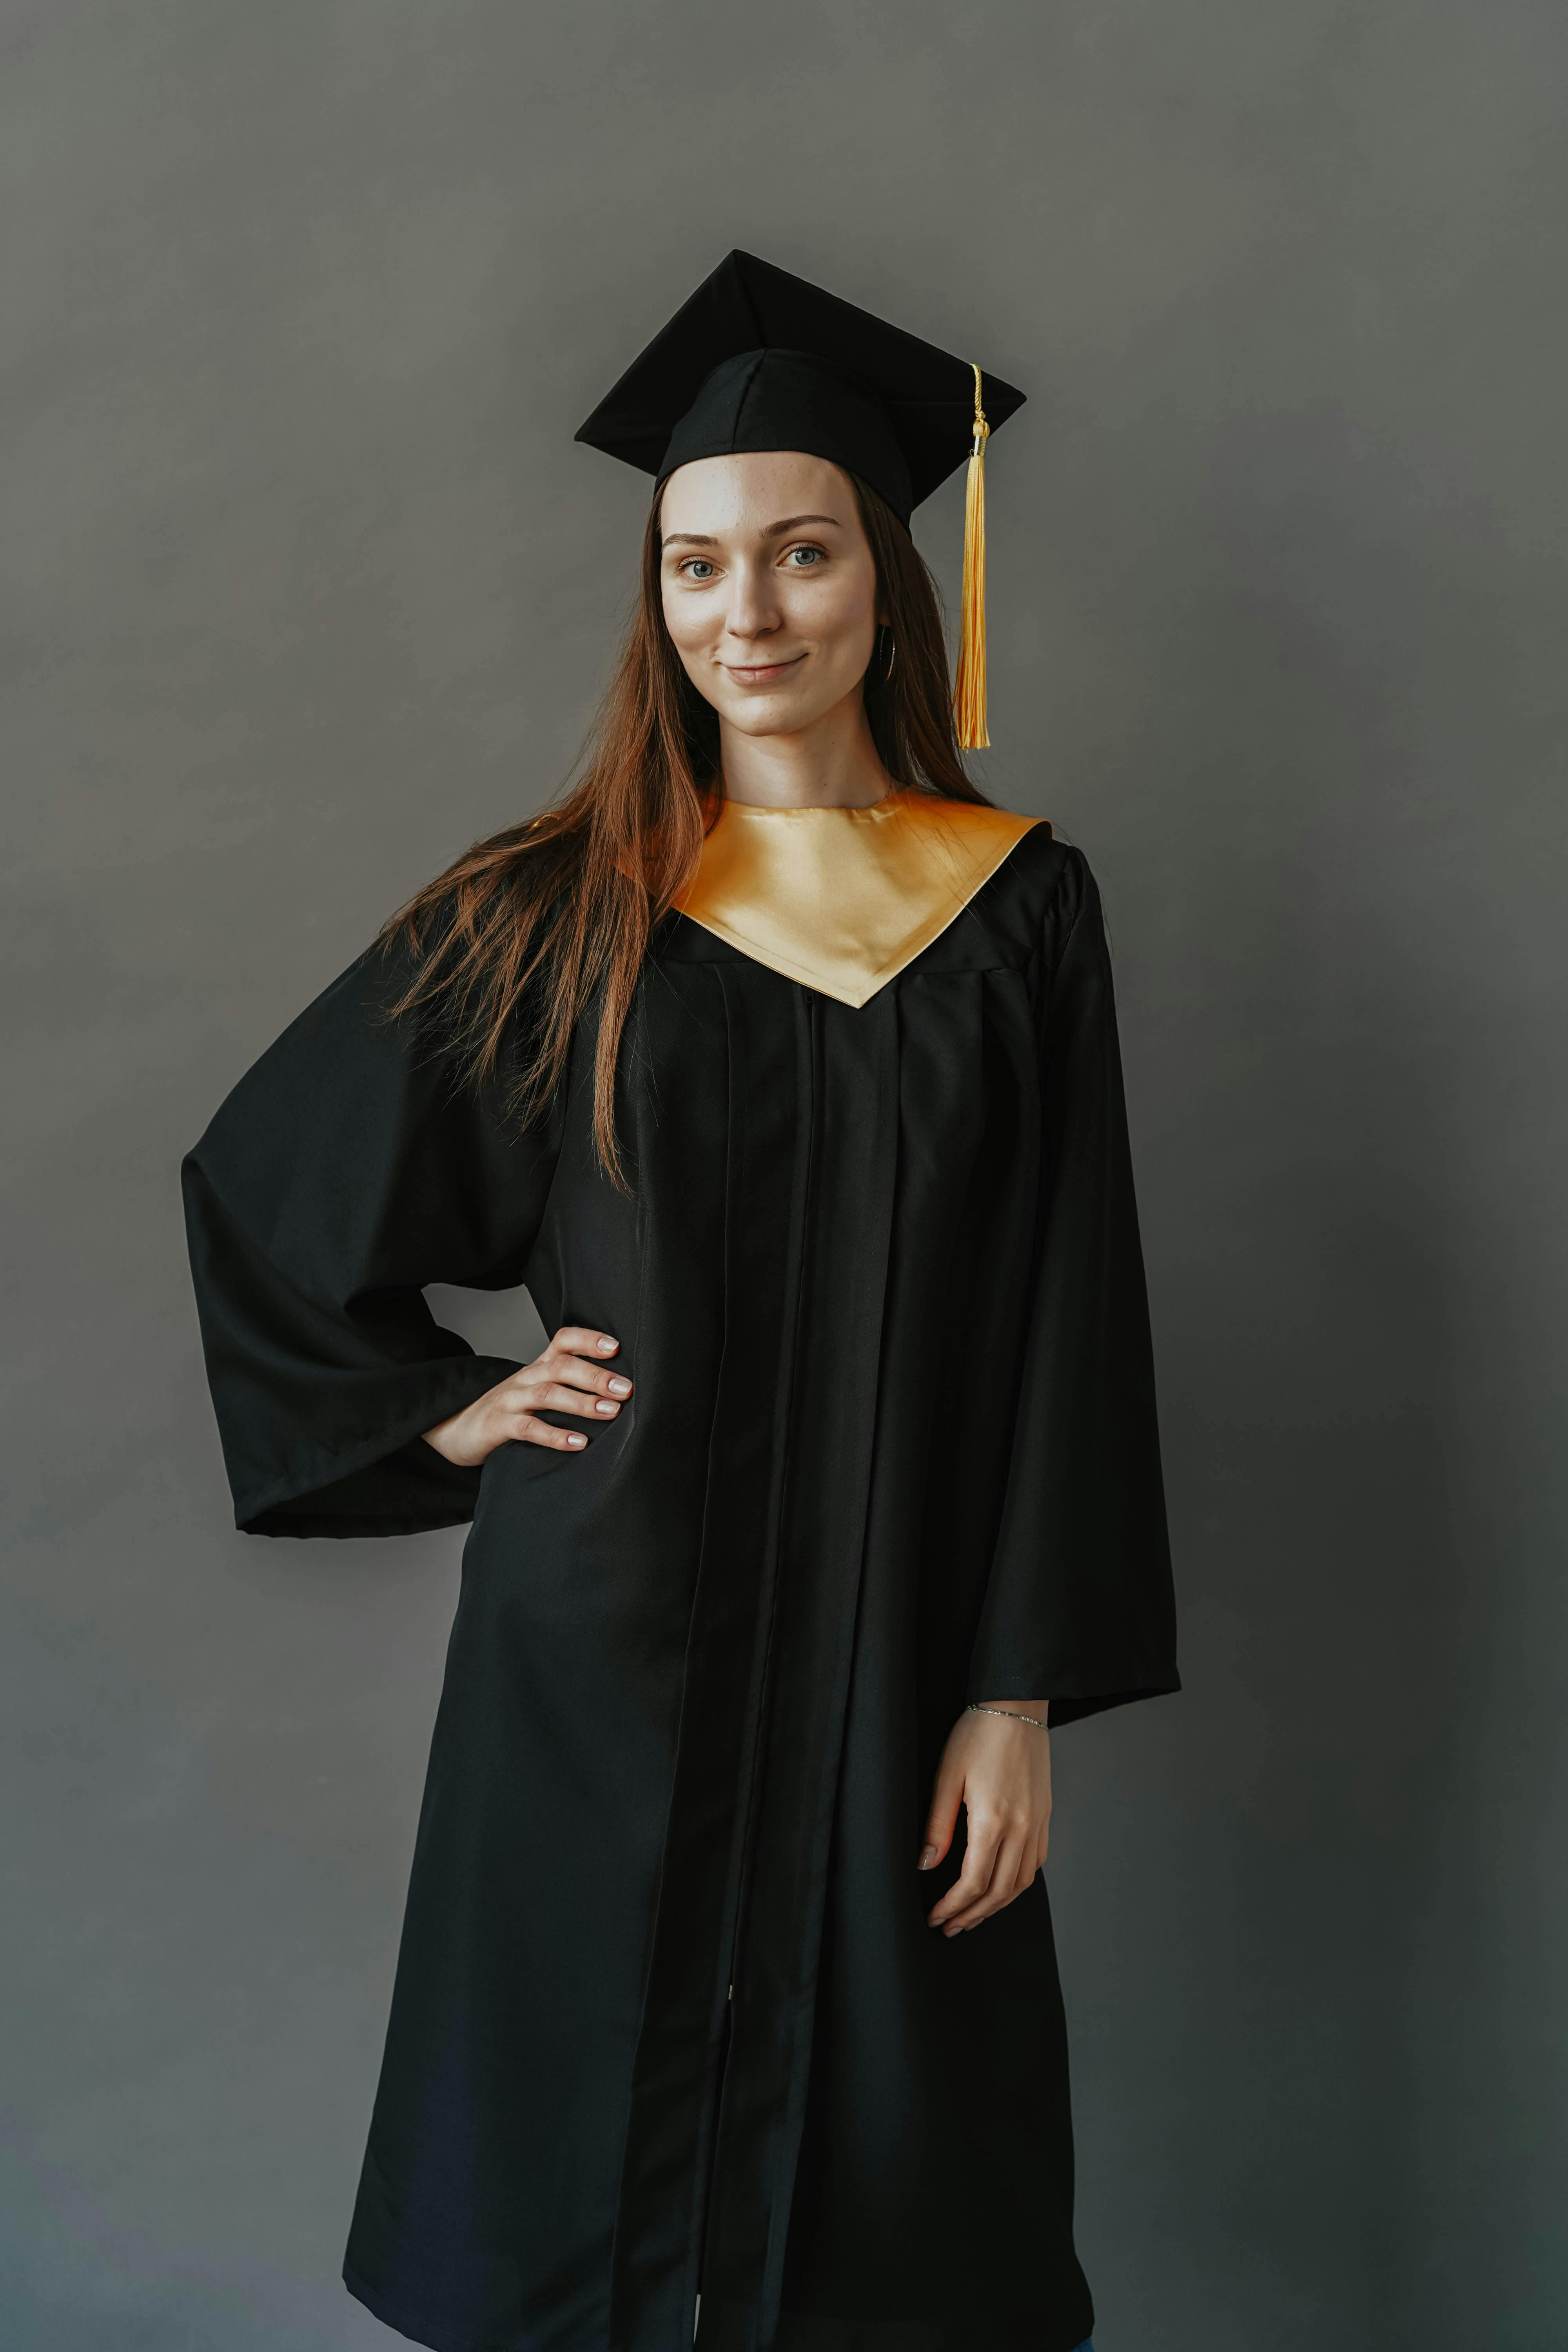 A Person Holding a Black Graduation Hat · Free Stock Photo